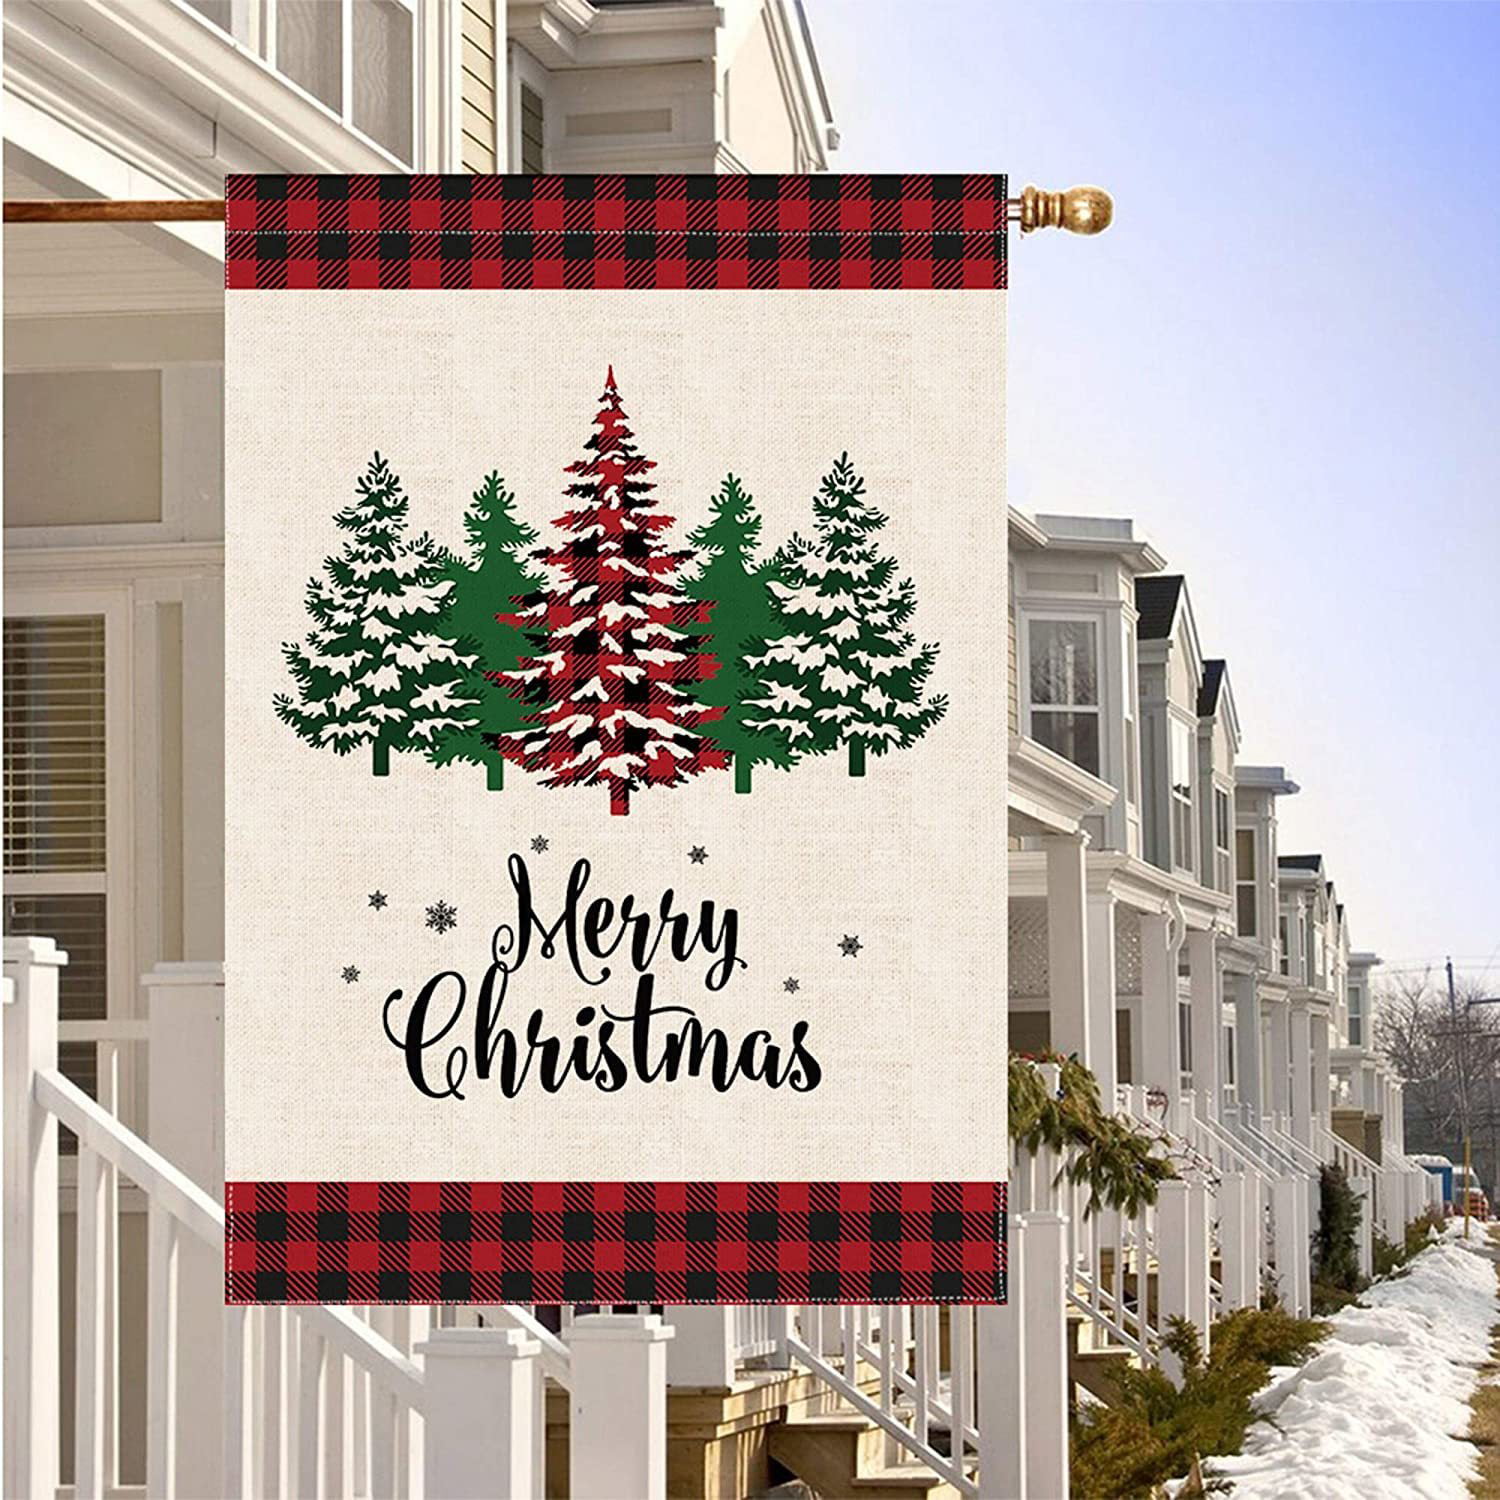 FRESH CUT CHRISTMAS TREES Advertising Vinyl Banner Flag Sign Many Size Available 